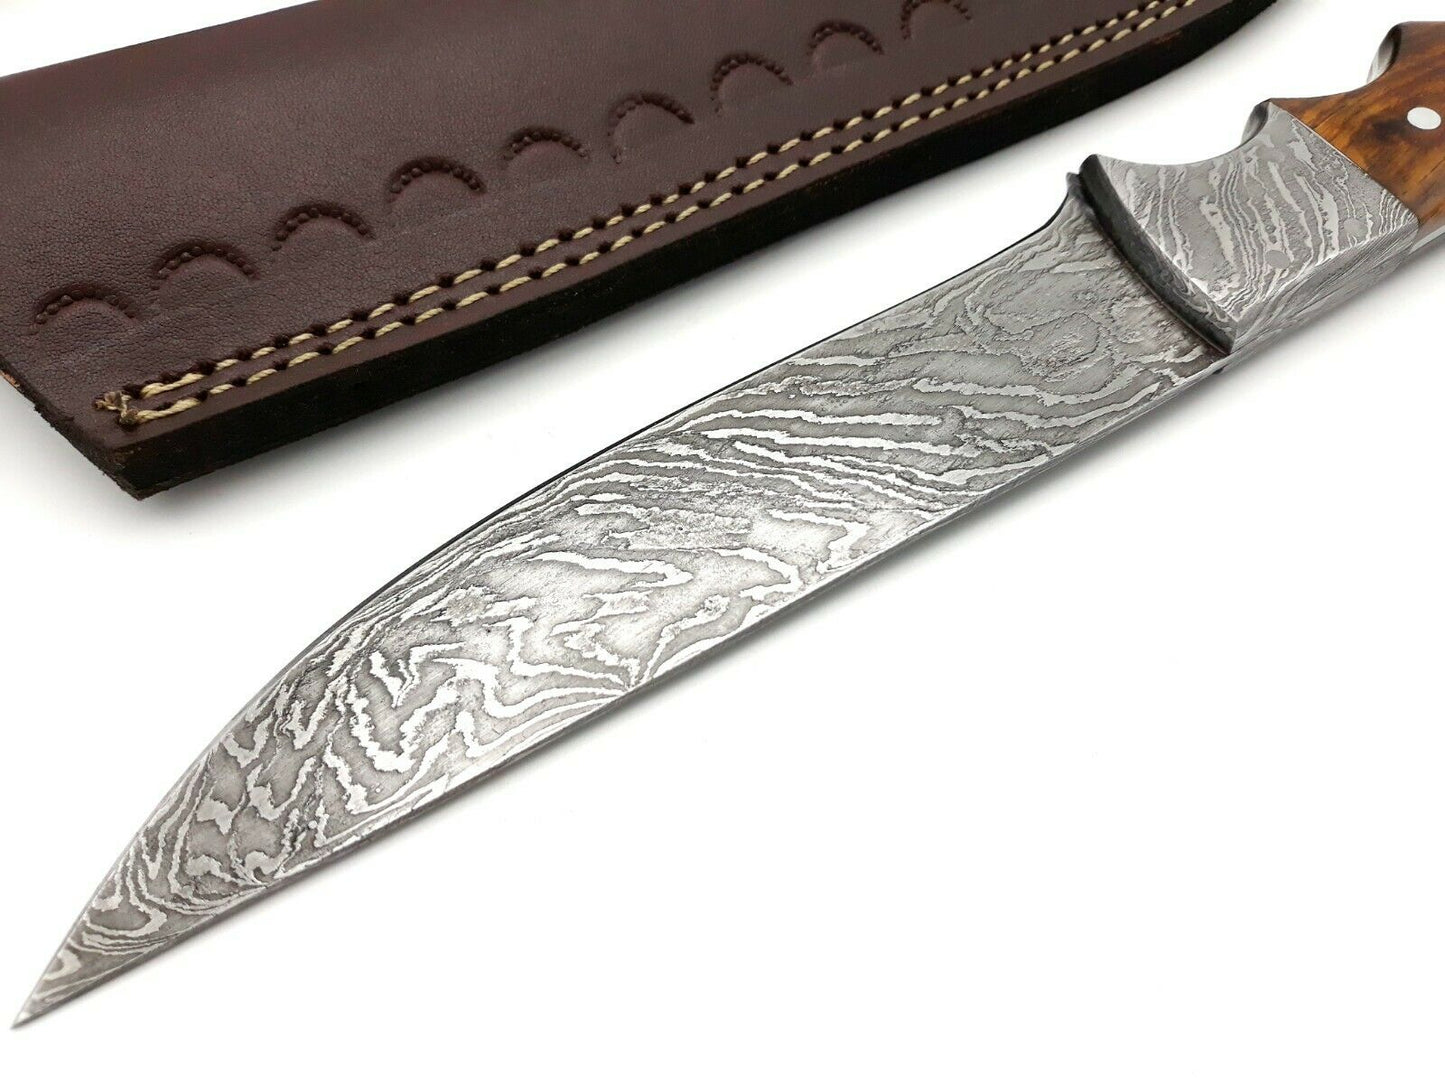 Handmade Forged Damascus Steel Utility/Skinner Knife Over 200 Layers With Sheath